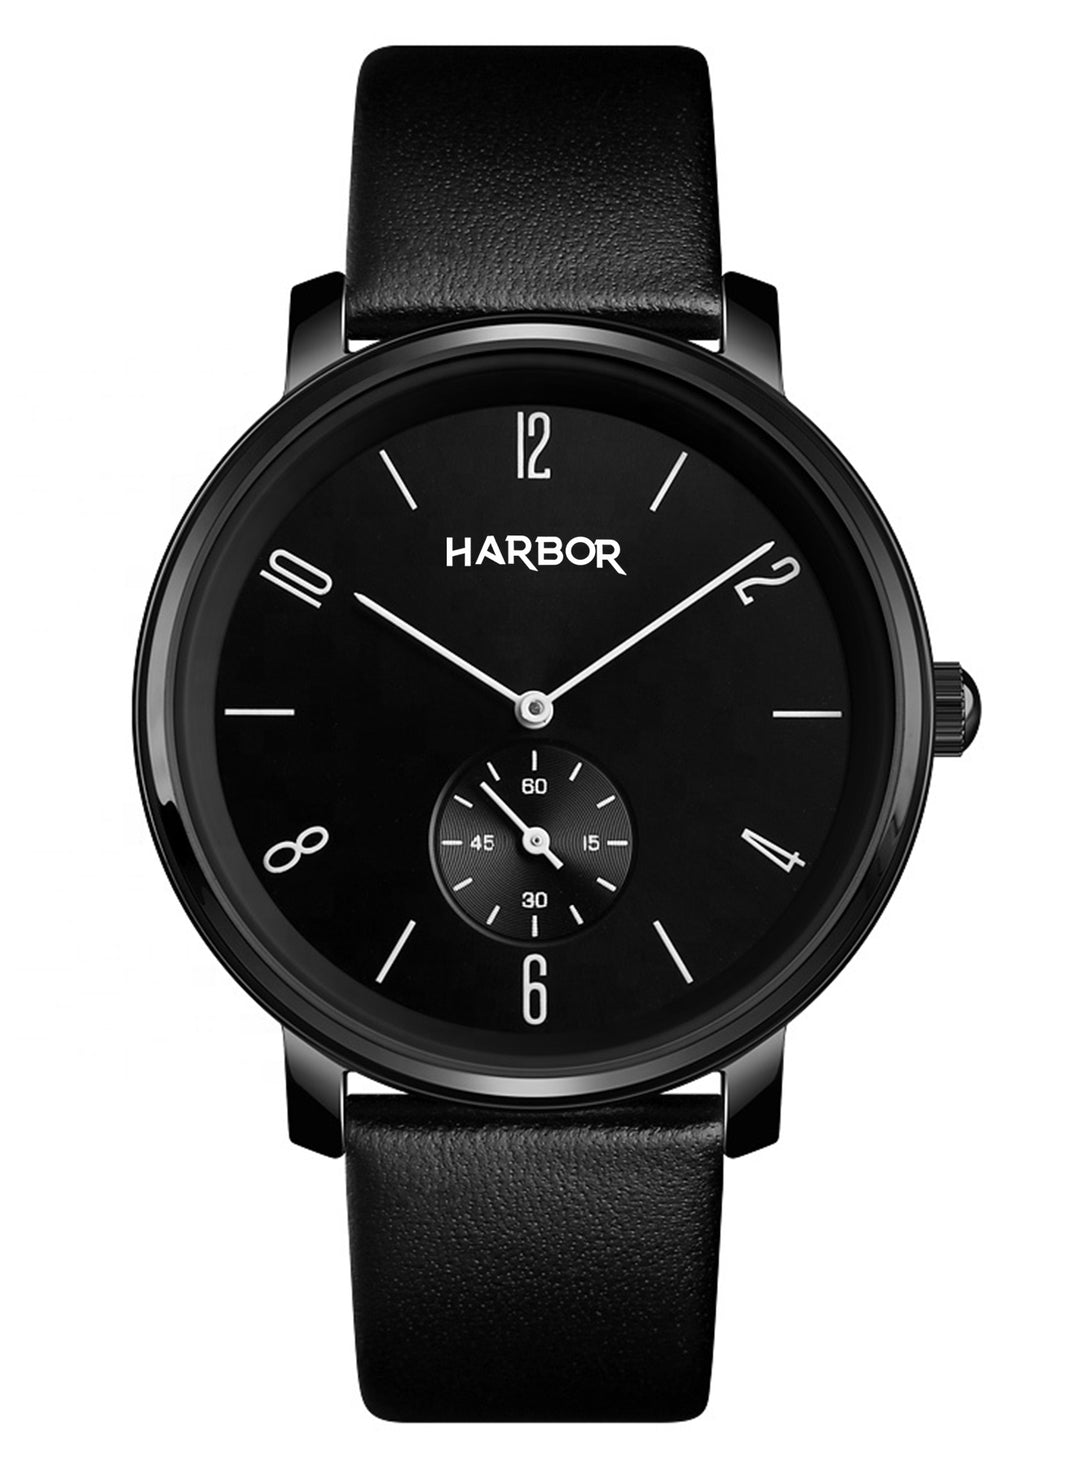 Harbor Slim Black Genuine Leather Strap Analogue Simple And Fashion Business Wrist Watch For Men